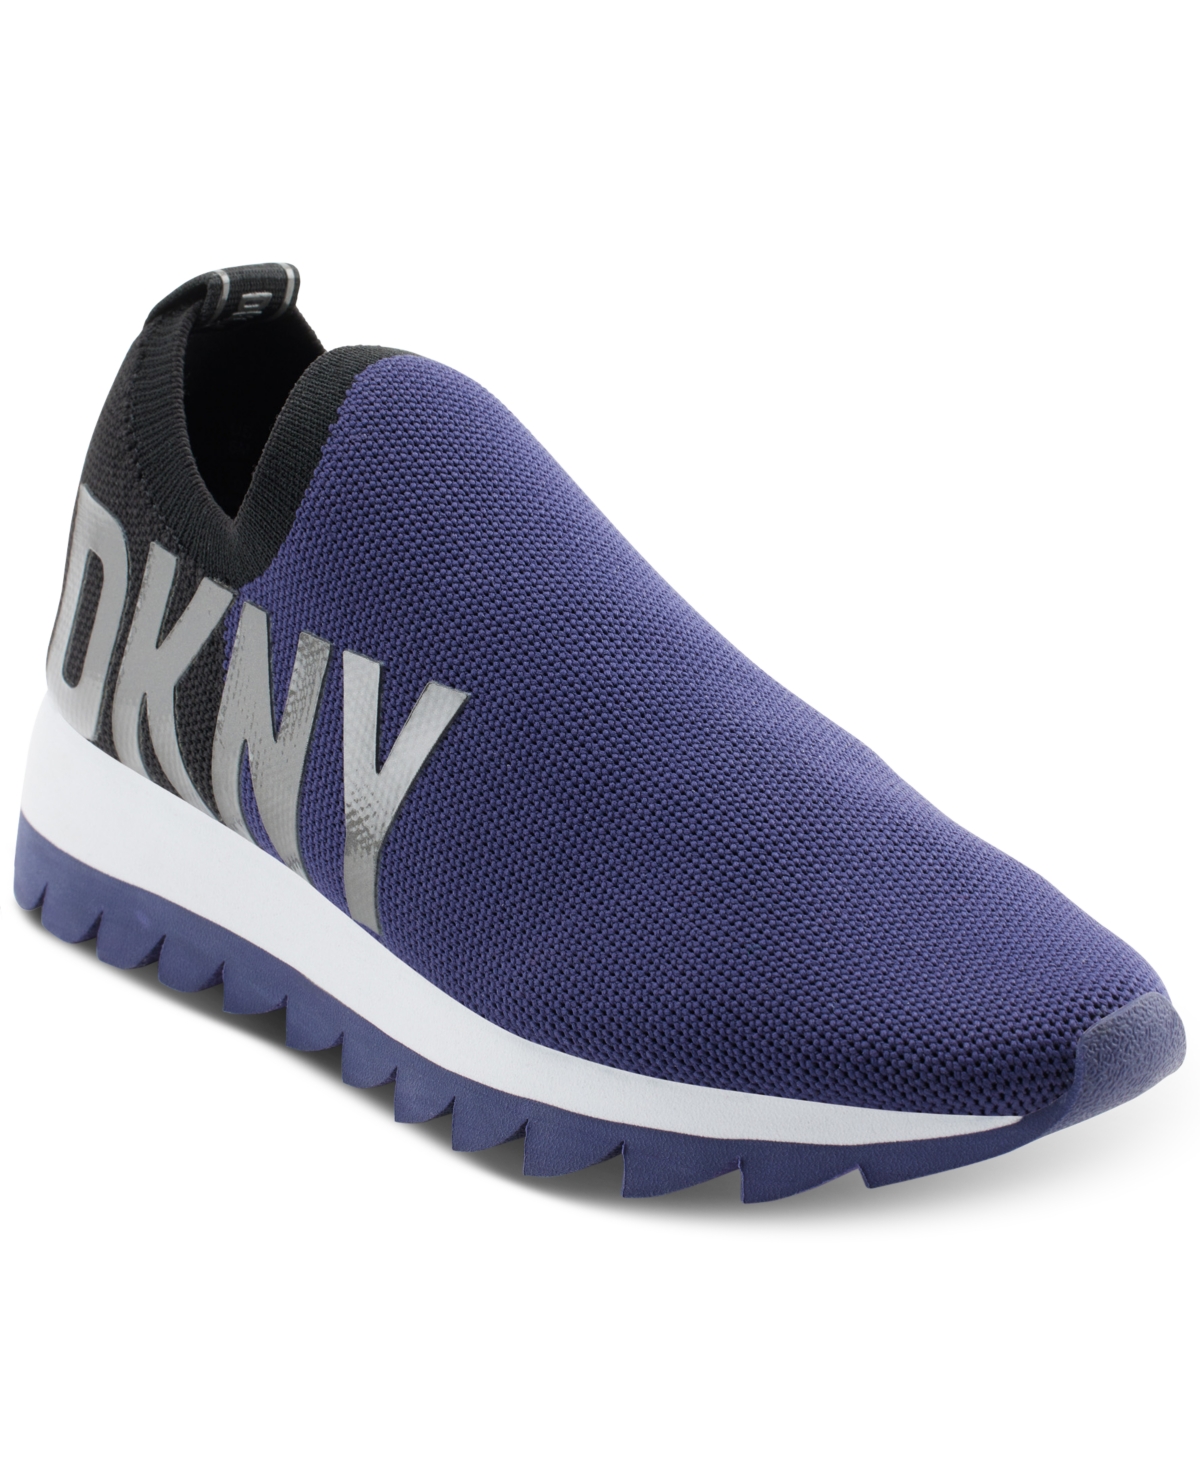 Women's Justine Lace-Up Slip-On Sneakers